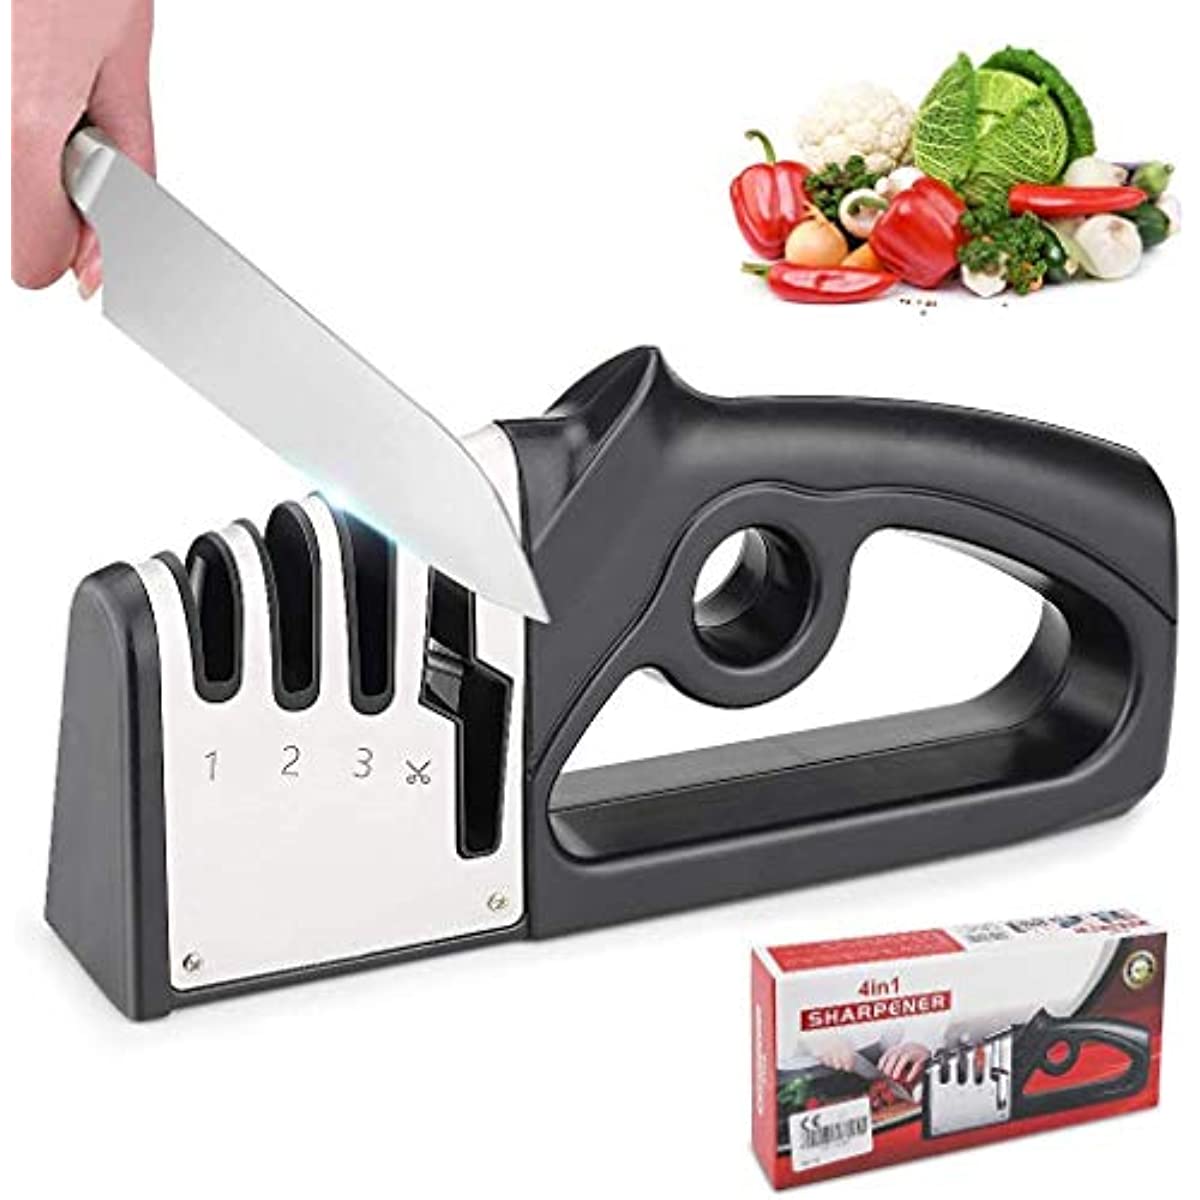 Knife Sharpener for Kitchen, 4 in 1 Knife and Scissors Sharpener, 4 Stages Professional Manual Sharpening Tool with Diamond, Tungsten Steel, Ceramic